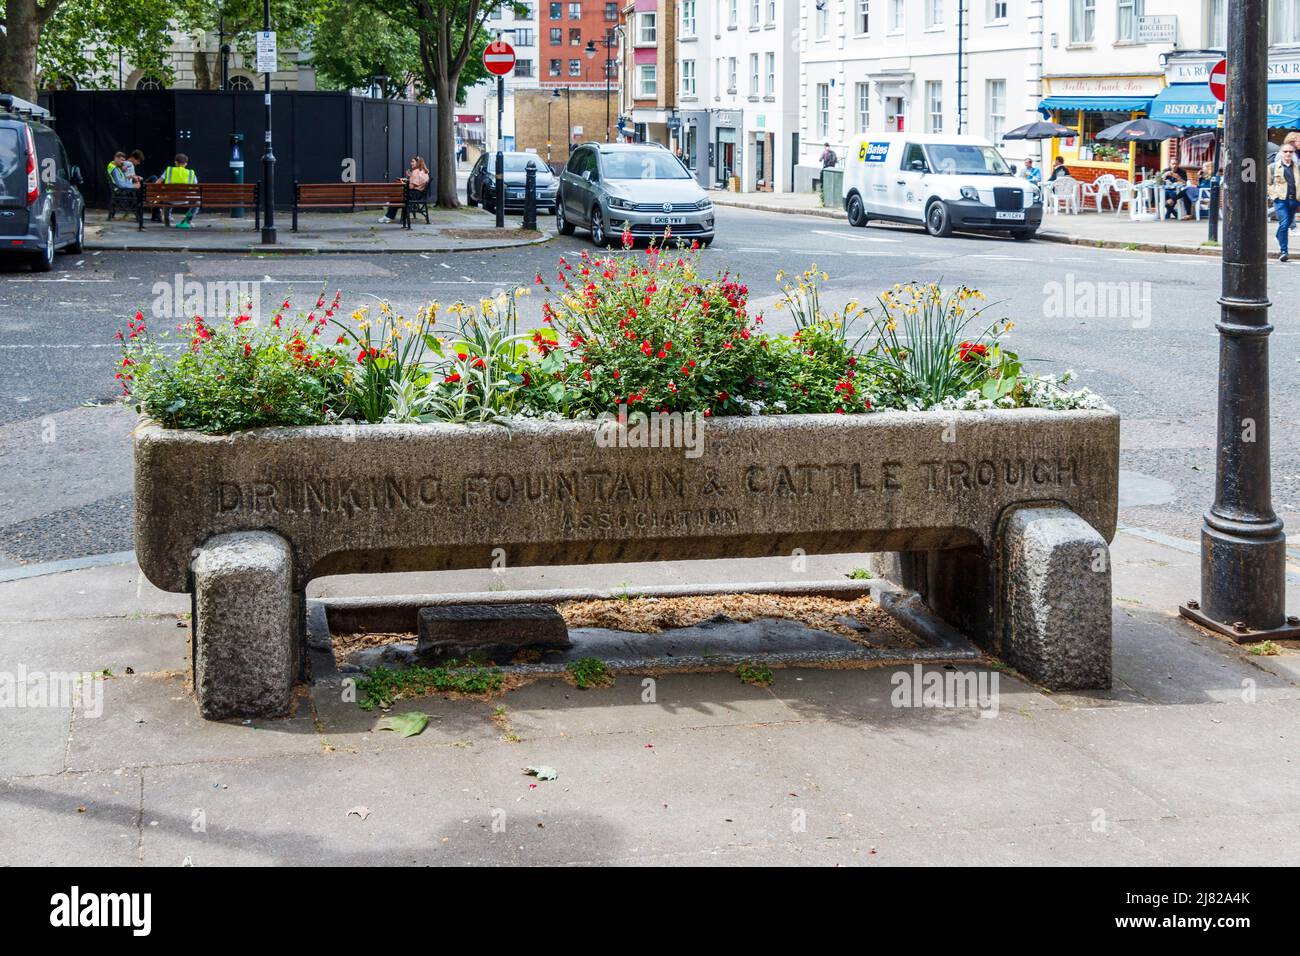 A trough of the Metropolitan Drinking Fountain and Cattle Trough Association planted with flowers, Clerkenwell, London, UK Stock Photo